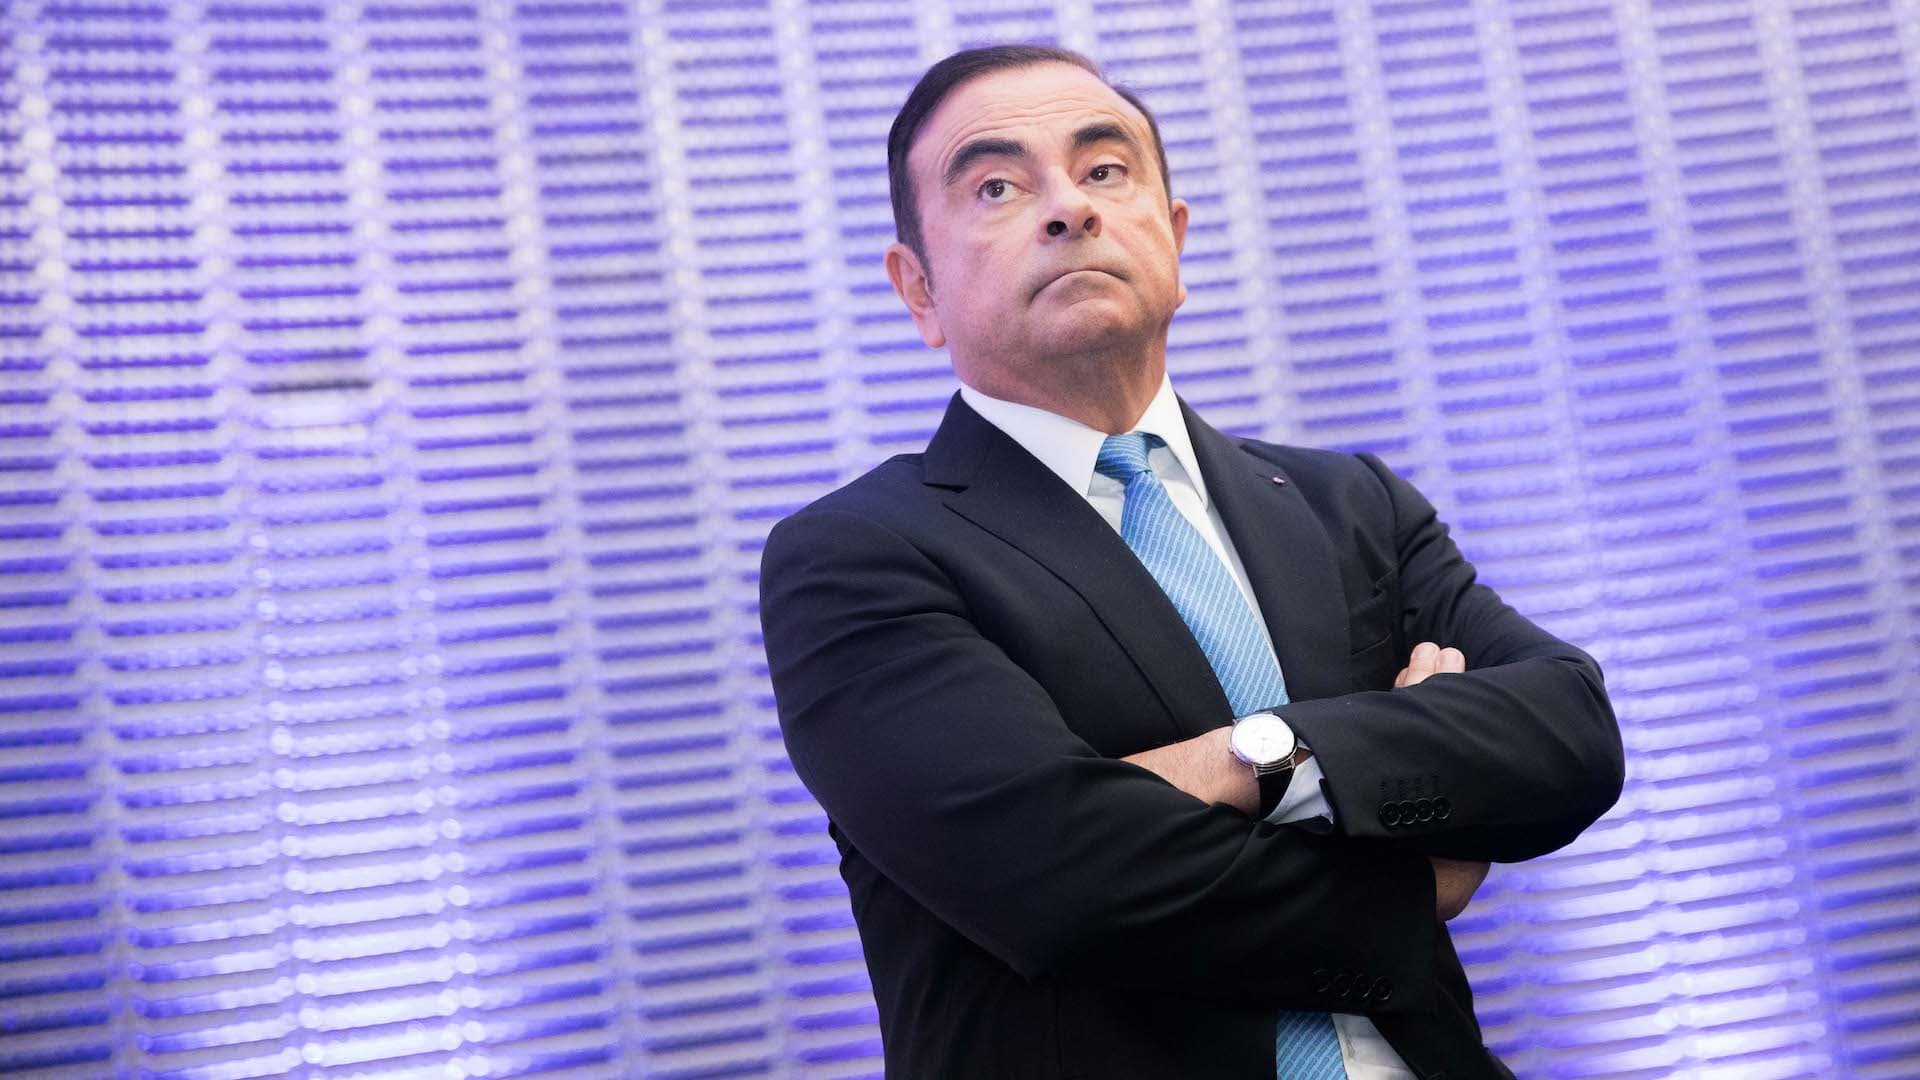 Nissan Chairman Carlos Ghosn and American Exec Ousted Over ‘Significant Acts of Misconduct’